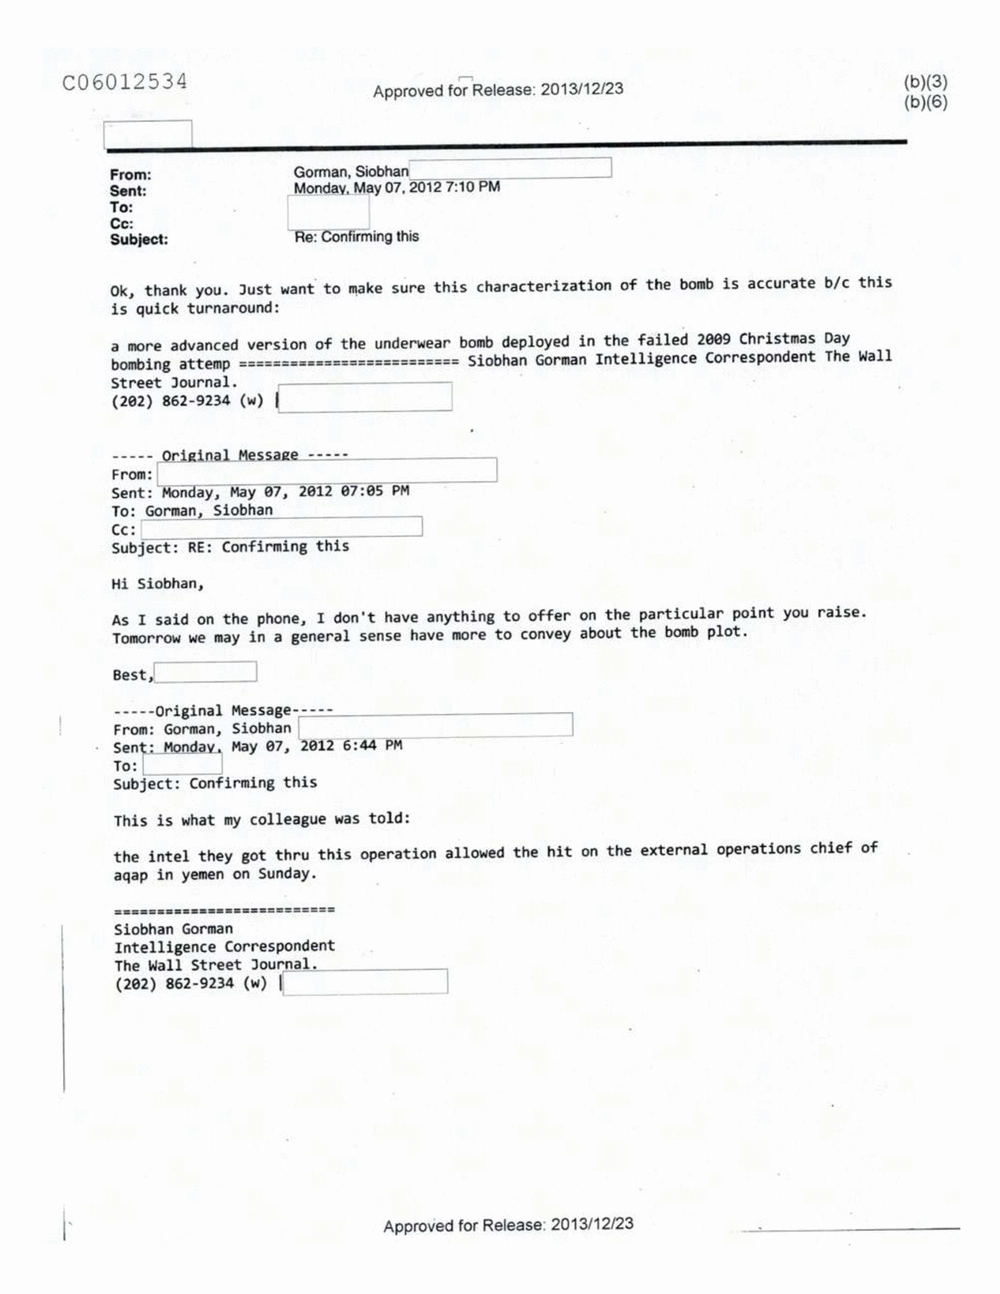 Page 67 from Email Correspondence Between Reporters and CIA Flacks